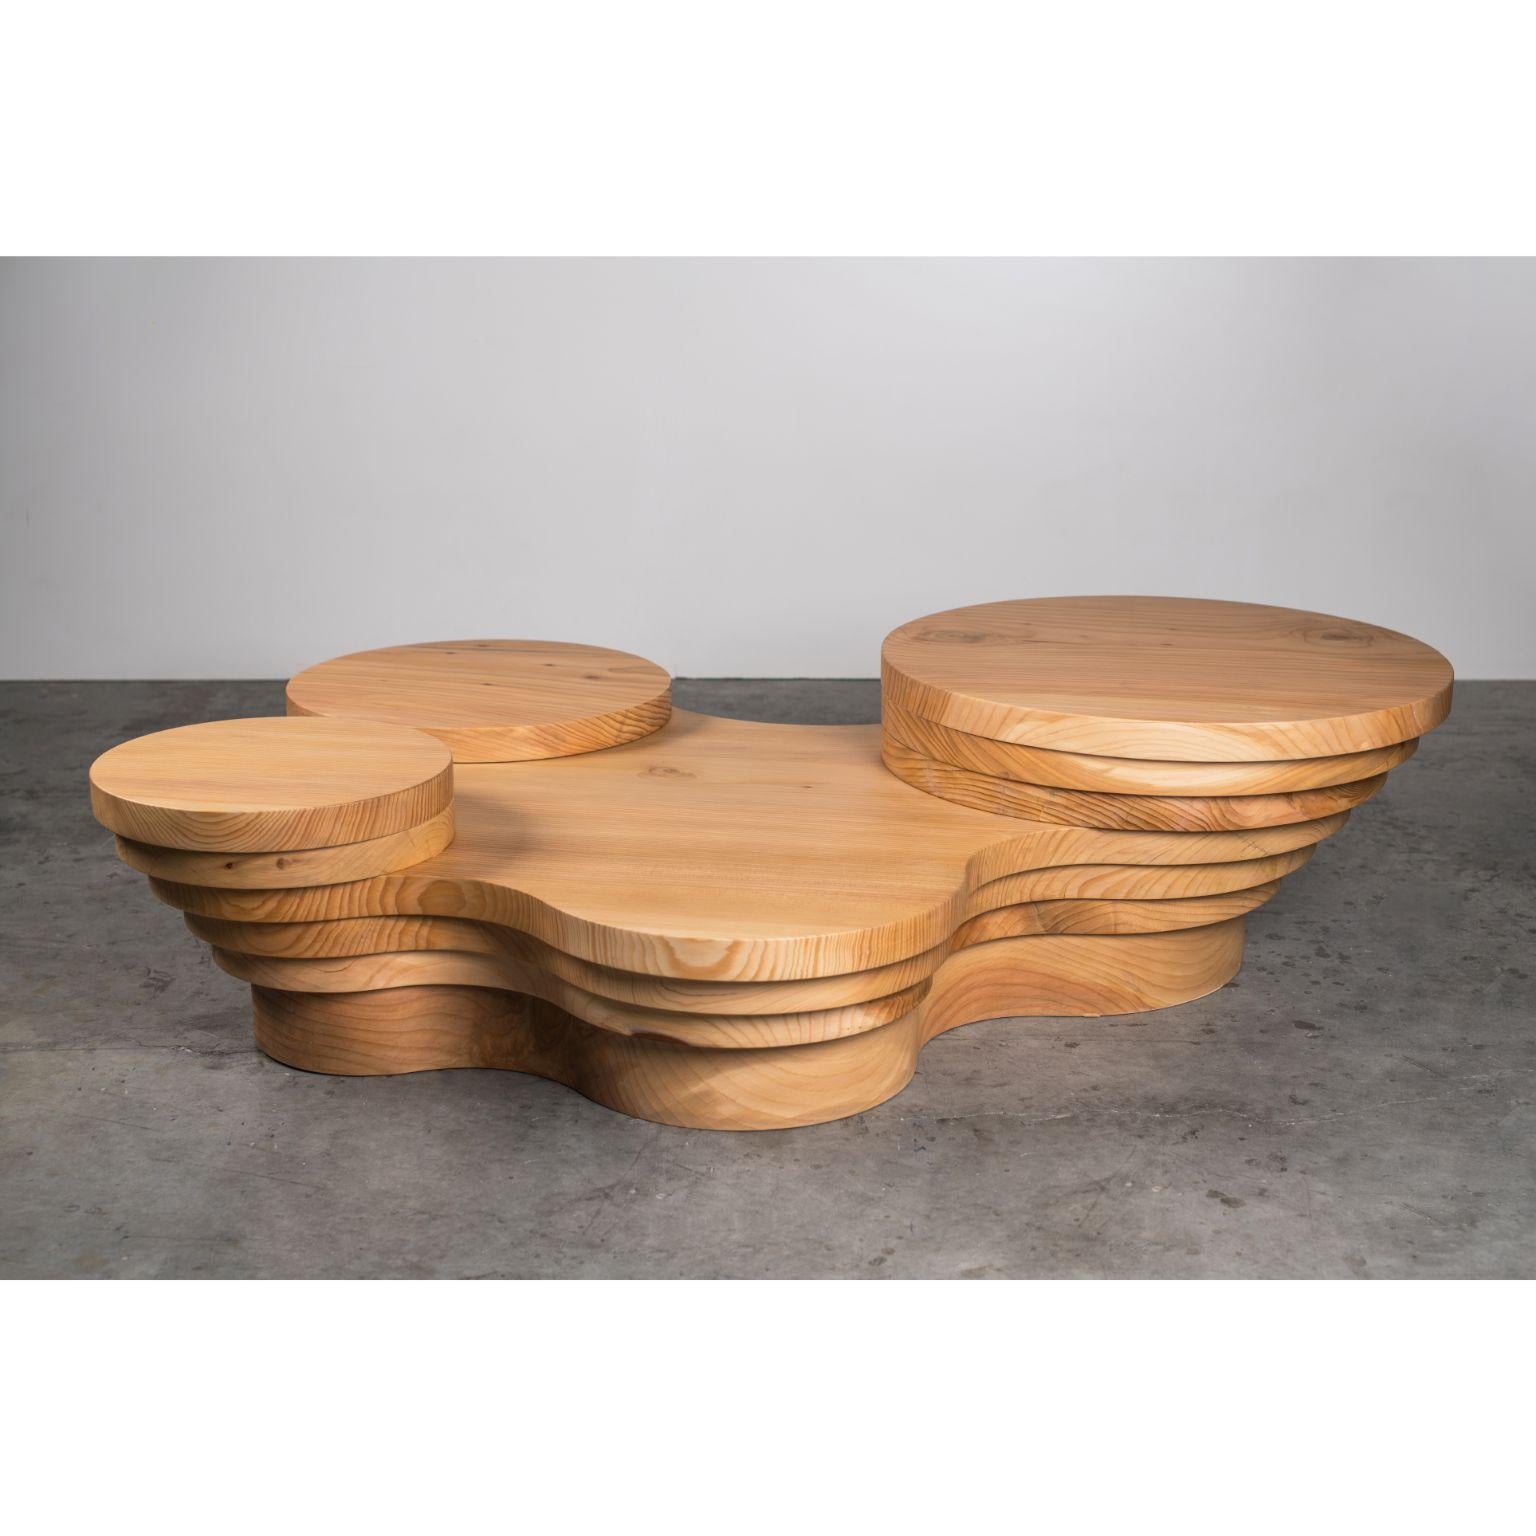 Slice me up cedar wood sculptural coffee table by Pietro Franceschini
Sold exclusively by Galerie Philia
Dimensions: W 160 x L 120 x H 36 cm
Materials: Solid cedar wood

Made to order dimensions can be ordered.

Pietro Franceschini is an